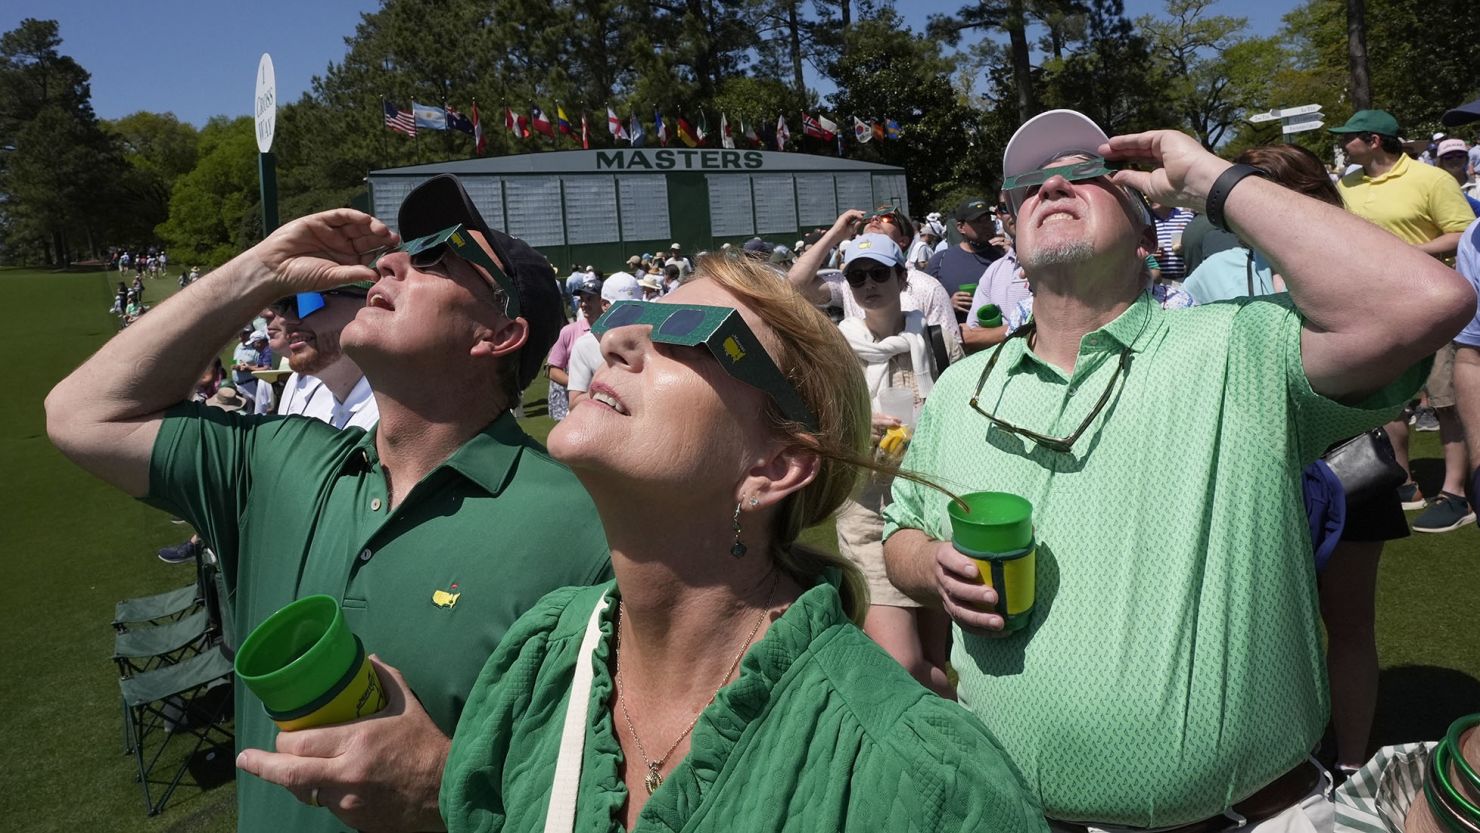 Patrons watch the solar eclipse that occurred during a practice round for The Masters at Augusta National Golf Club in Georgia.